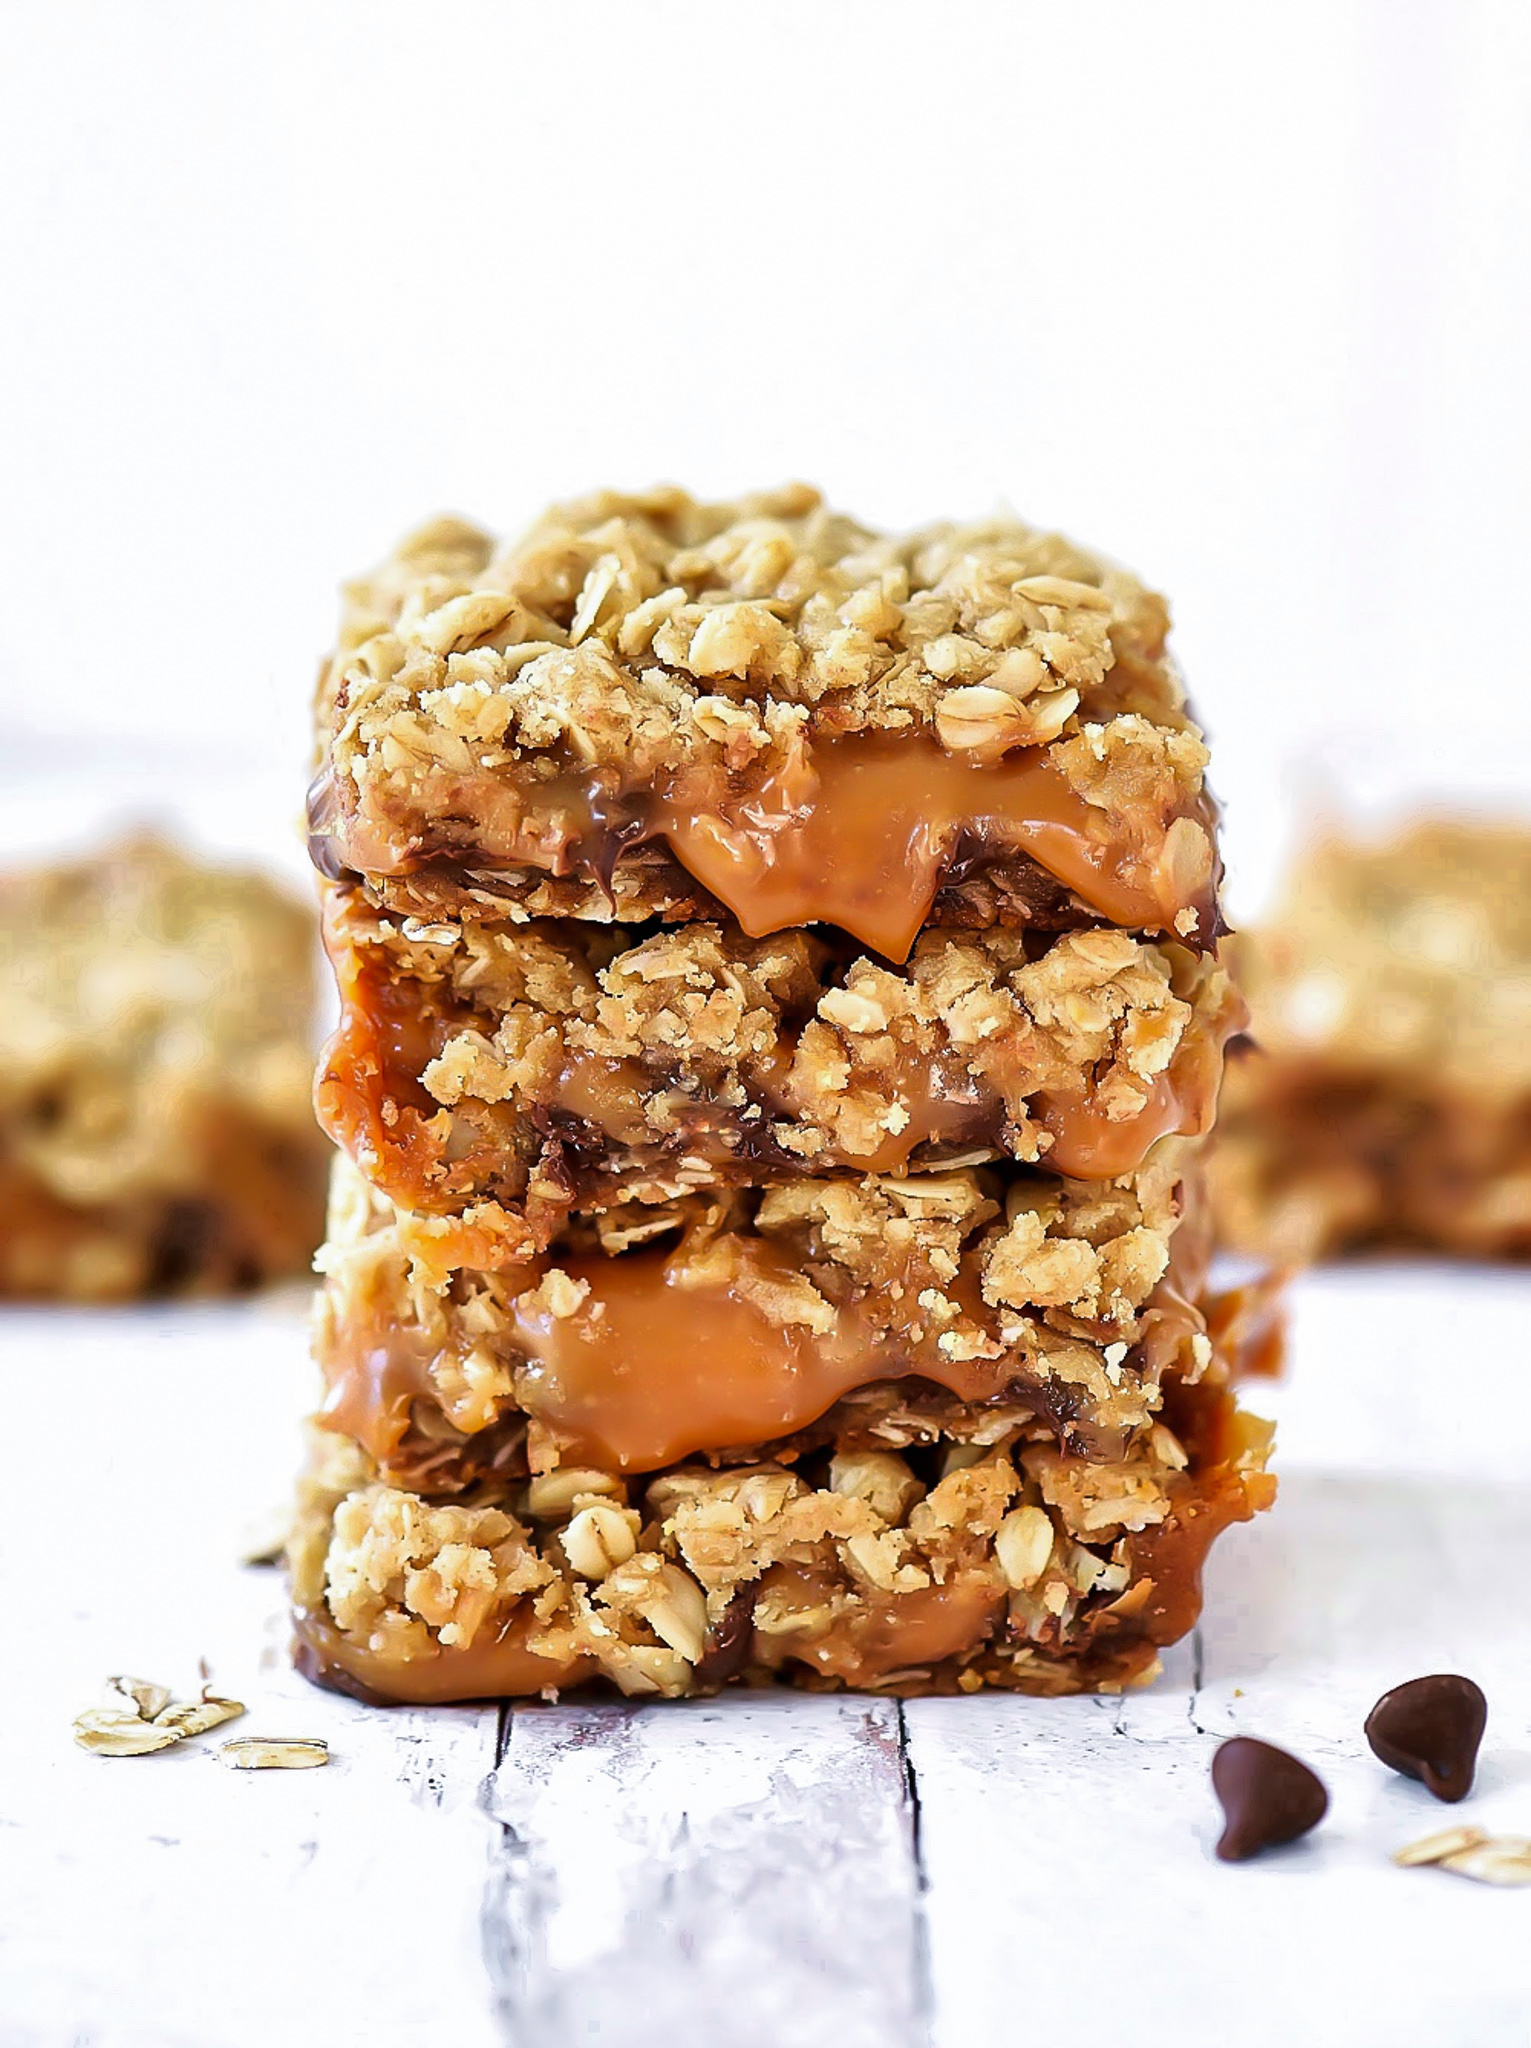 Oatmeal Carmelitas are layered cookie bars with an oatmeal and brown sugar crust and gooey caramel and chocolate filling!